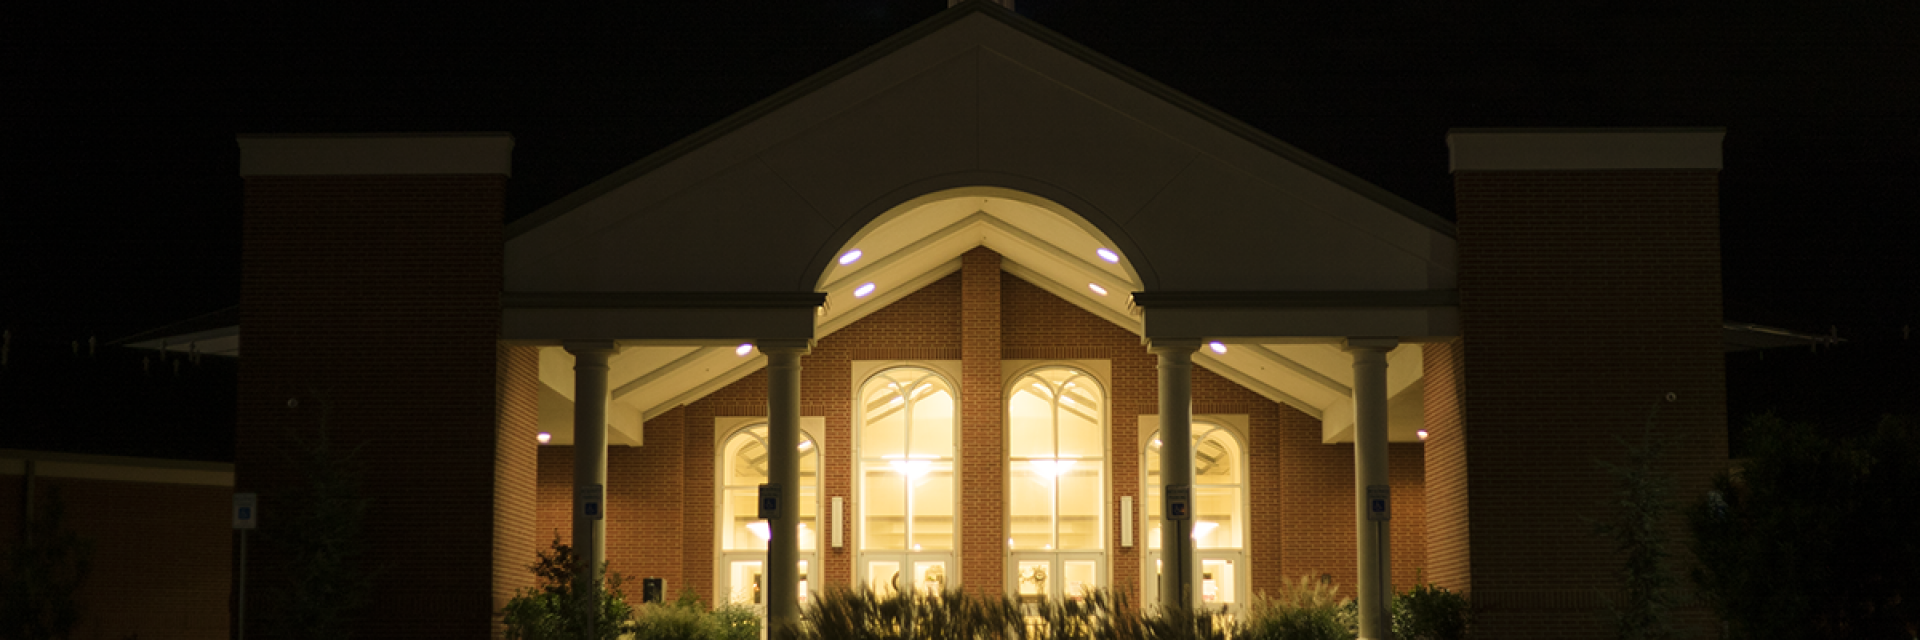 Front View of Church Building at Night